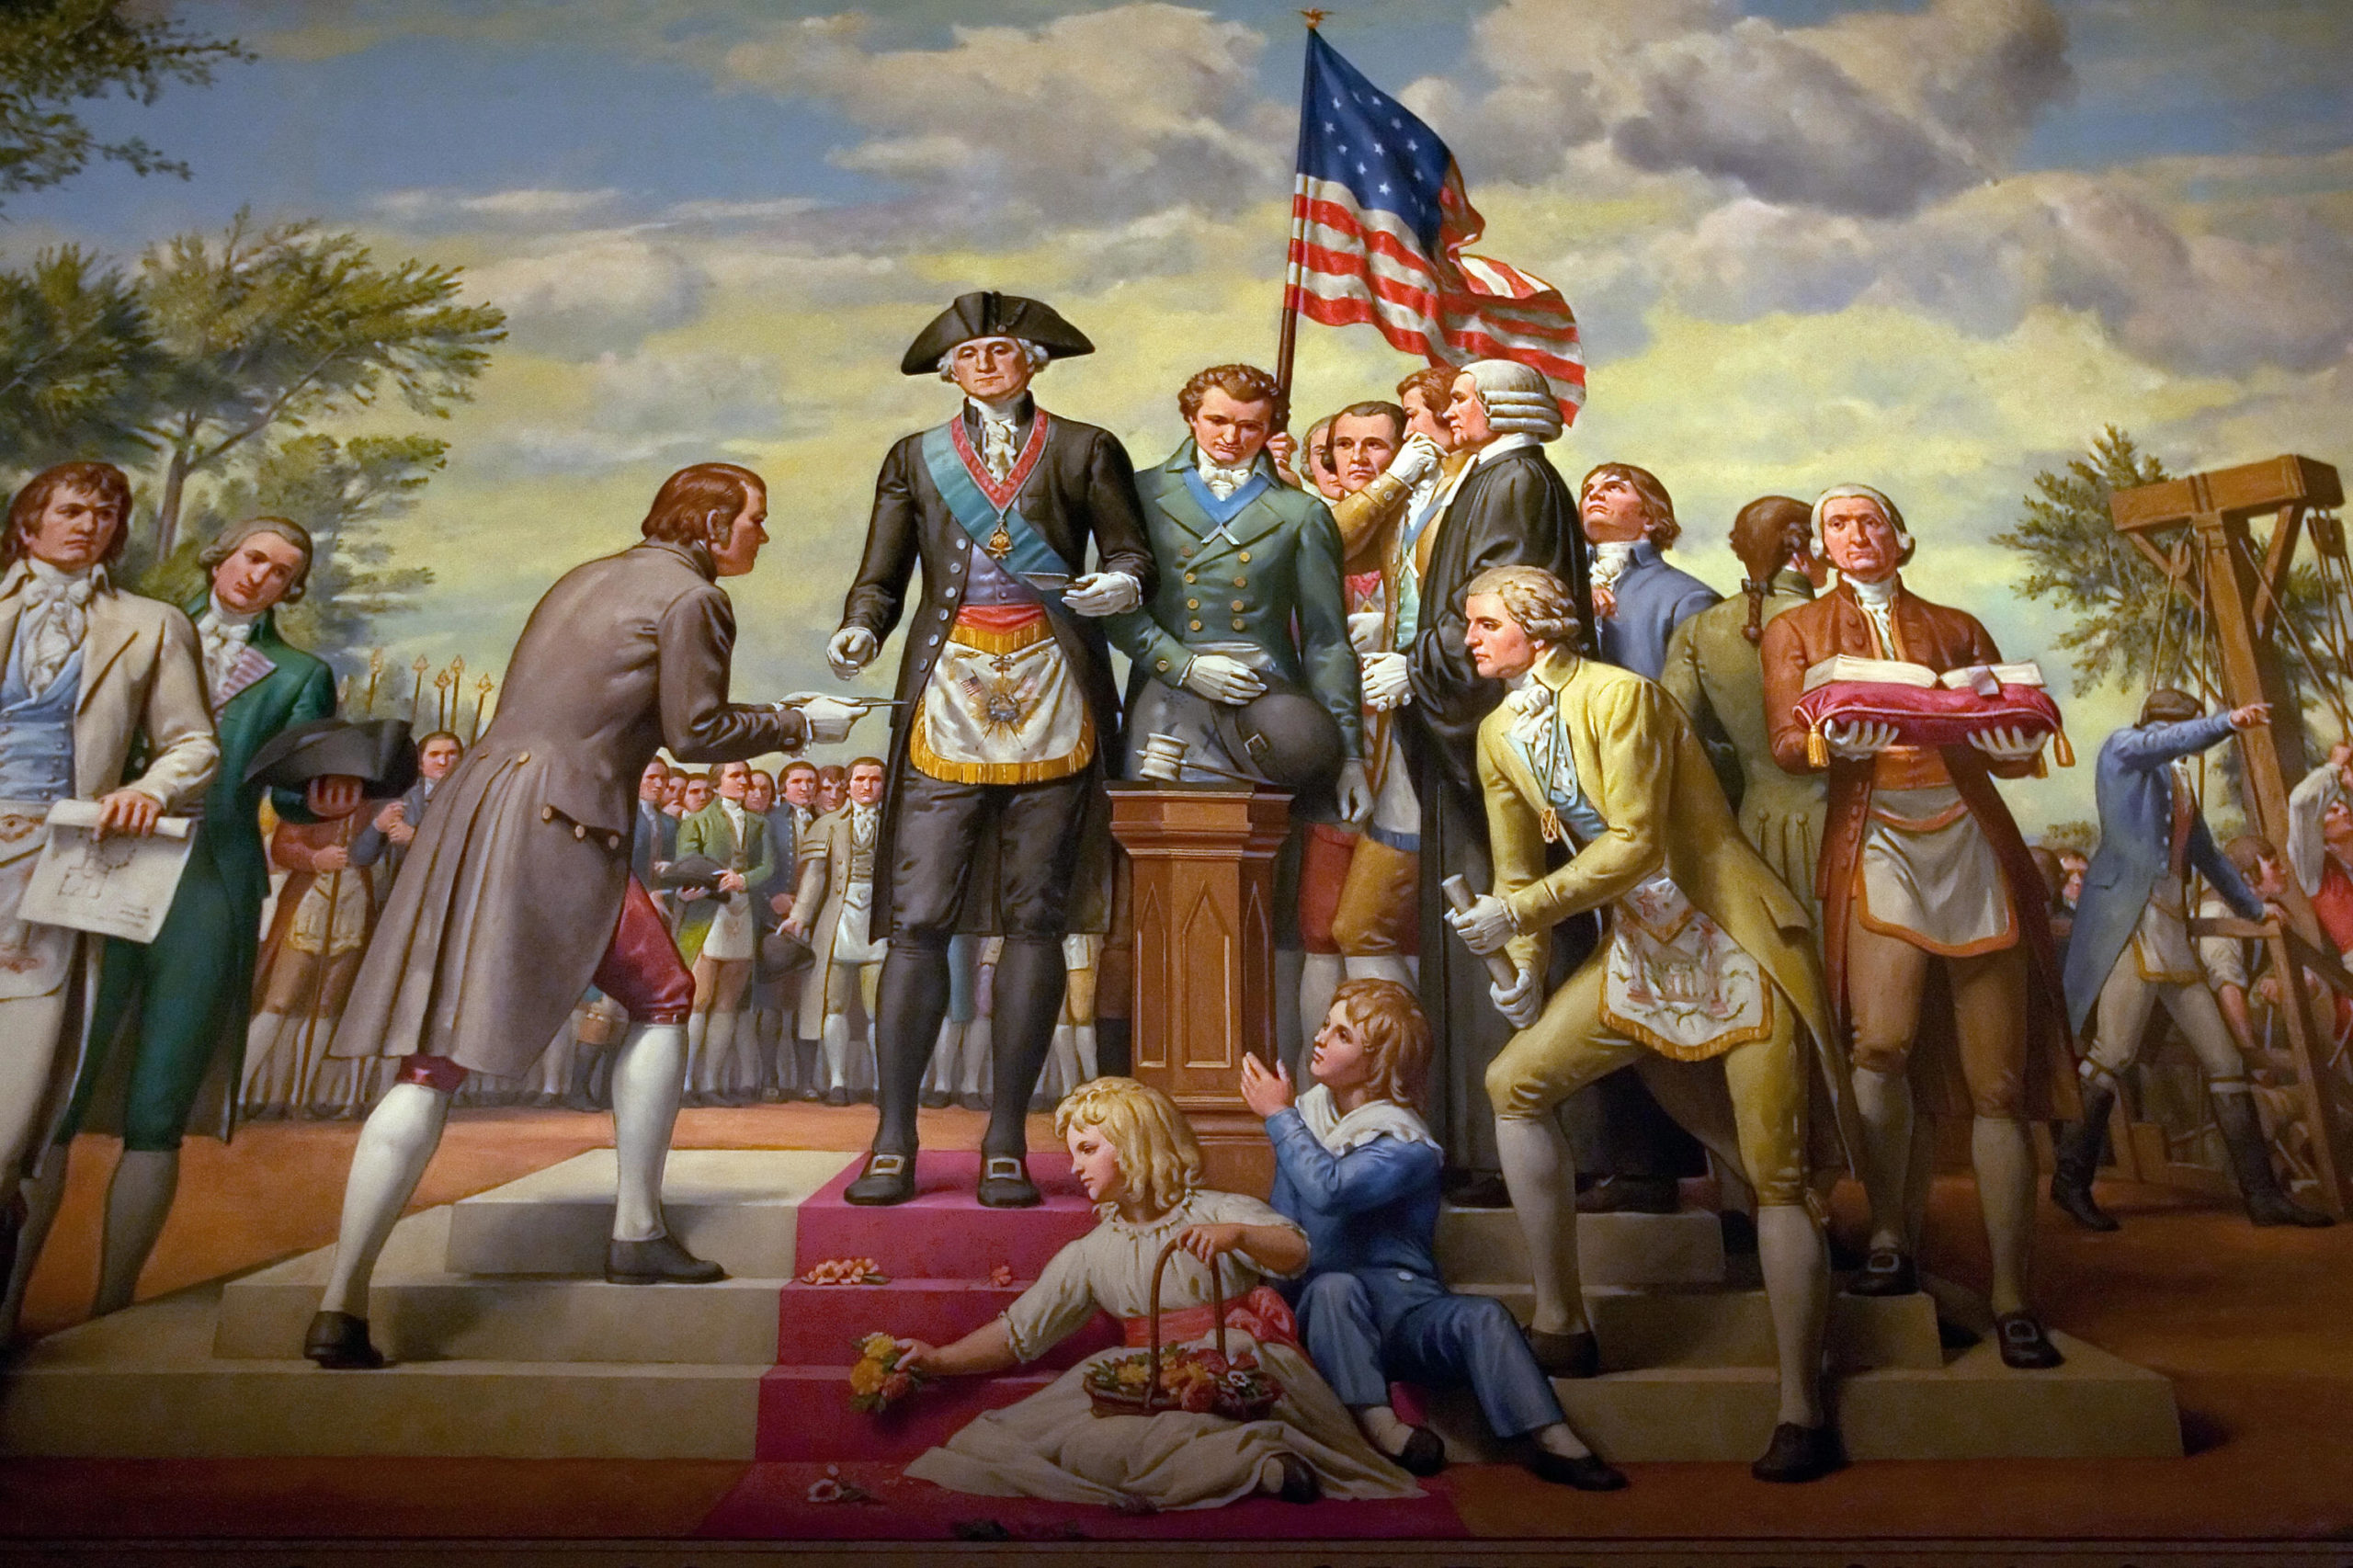 A mural depicts the first US President and a member of the Freemasons, George Washington, as he lays the cornerstone of the US Capitol on September 18, 1793, in Memorial Hall at the George Washington Masonic National Memorial in Alexandria, Virginia 20 November 2007. Washington is wearing full Masonic regalia. AFP PHOTO/SAUL LOEB (Photo credit should read SAUL LOEB/AFP via Getty Images)